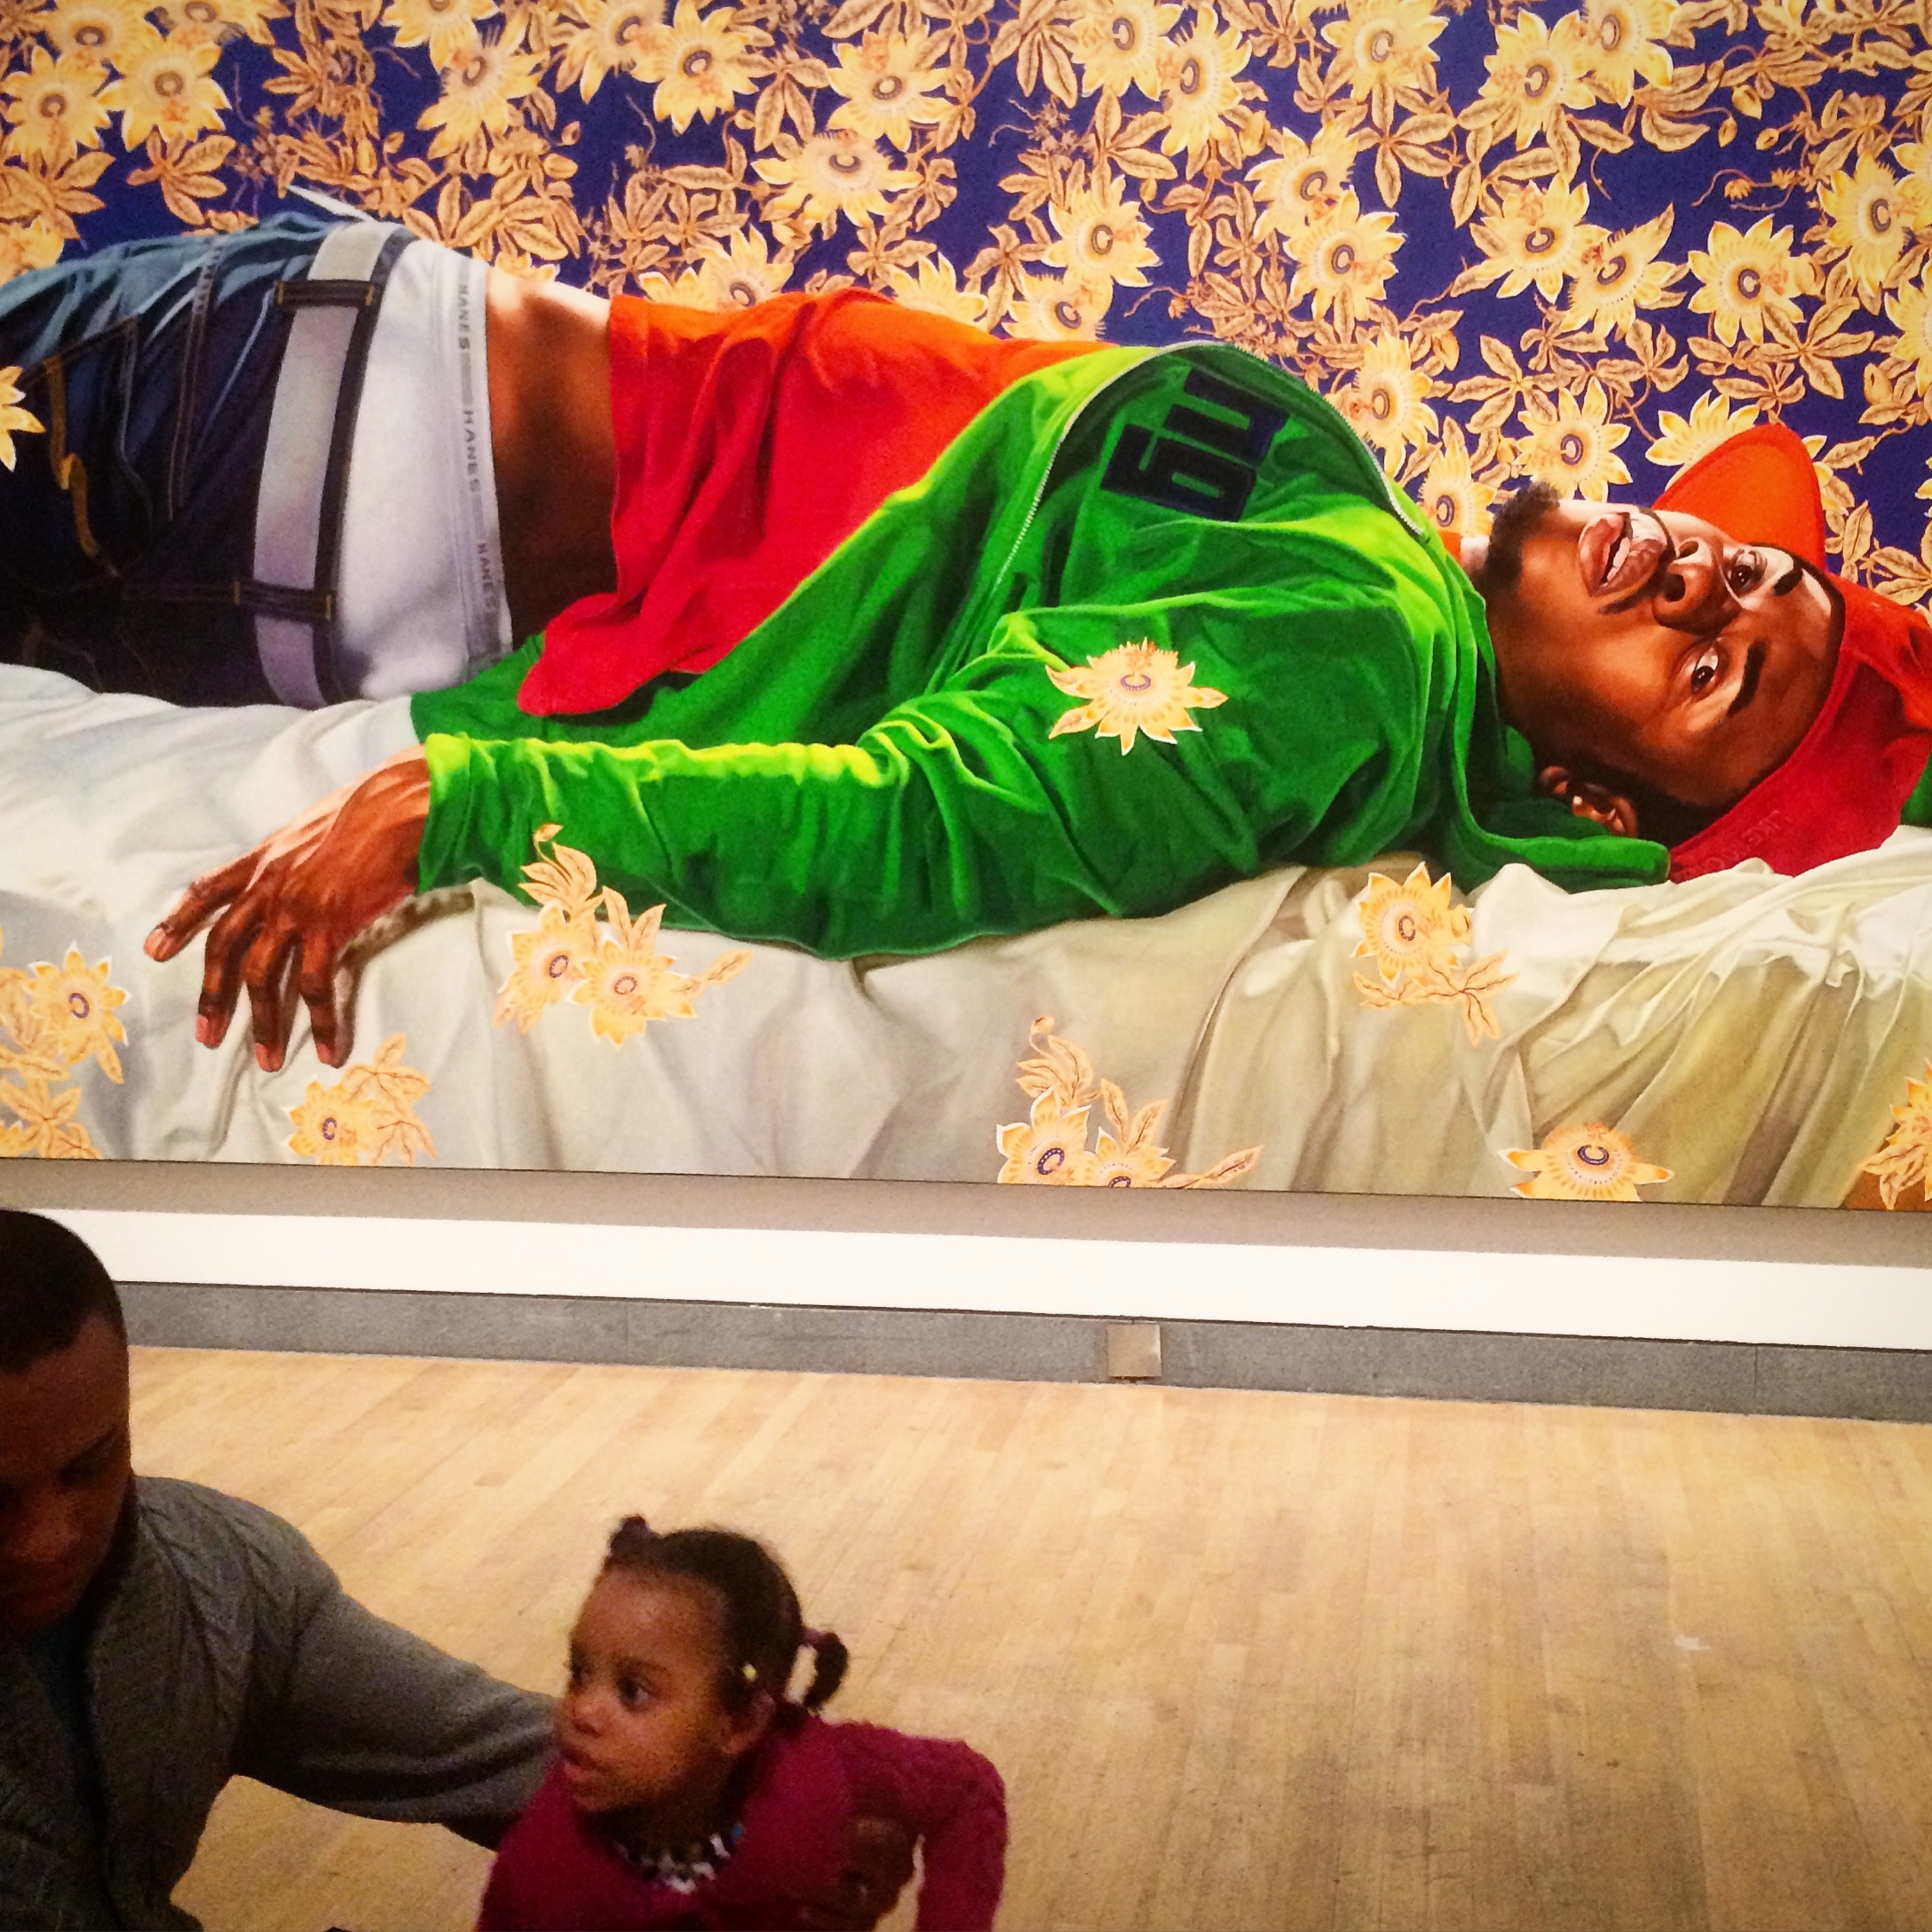 Kehinde Wiley African American Art Amazing Paintings Black Excellence Brooklyn Museum Social Commentary Racism